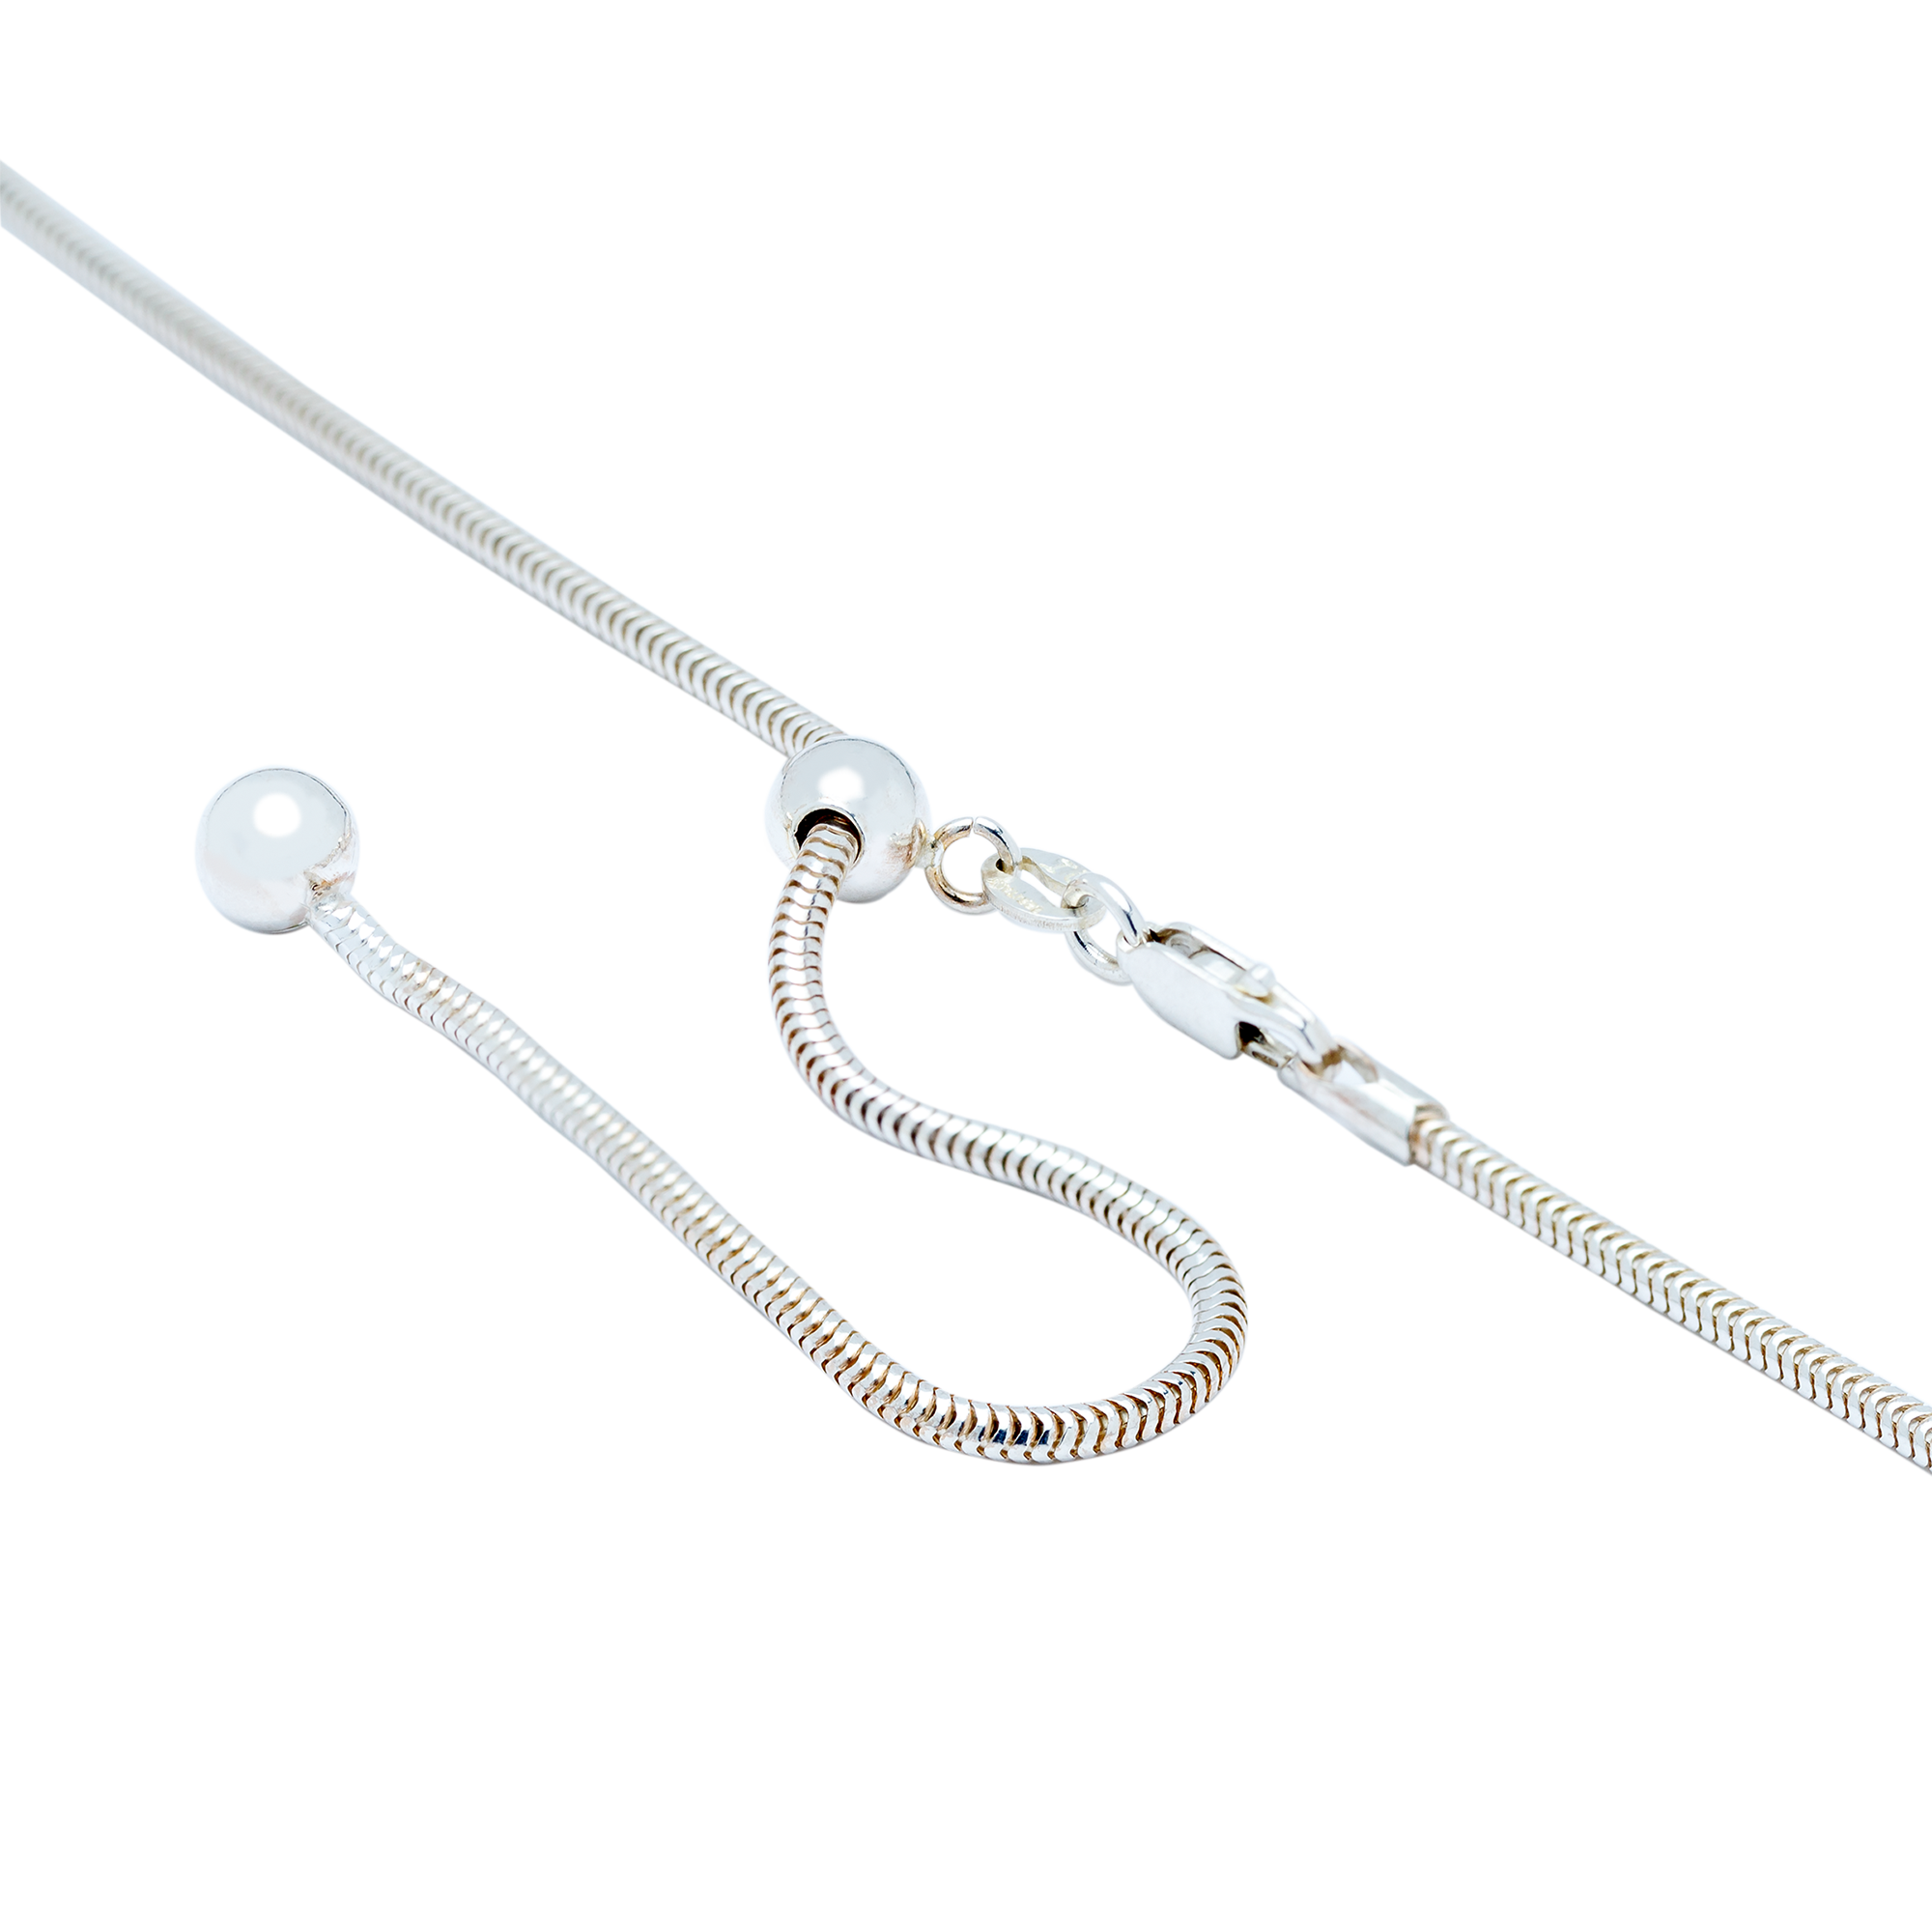 CH.DAV.1106 - 24 Inch Sterling Silver Thick Adjustable Chain